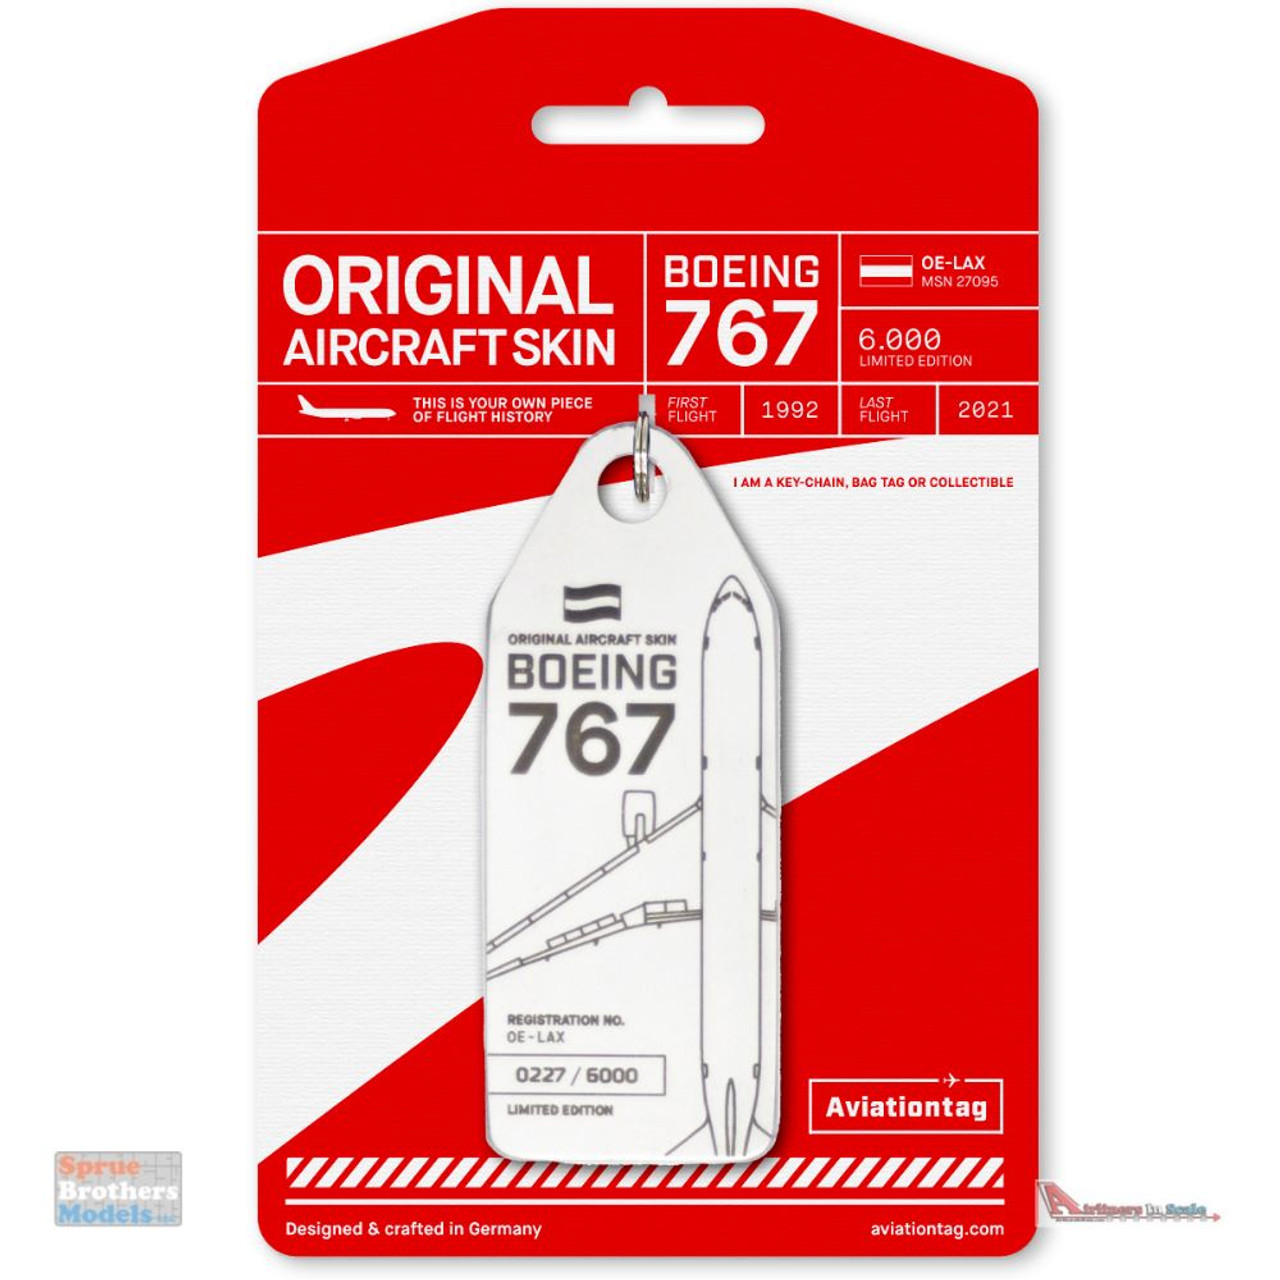 AVT116 AviationTag Boeing 767-300ER (Austrian Airlines) Reg #OE-LAX White  Original Aircraft Skin Keychain/Luggage Tag/Etc With Lost & Found Feature -  Sprue Brothers Models LLC